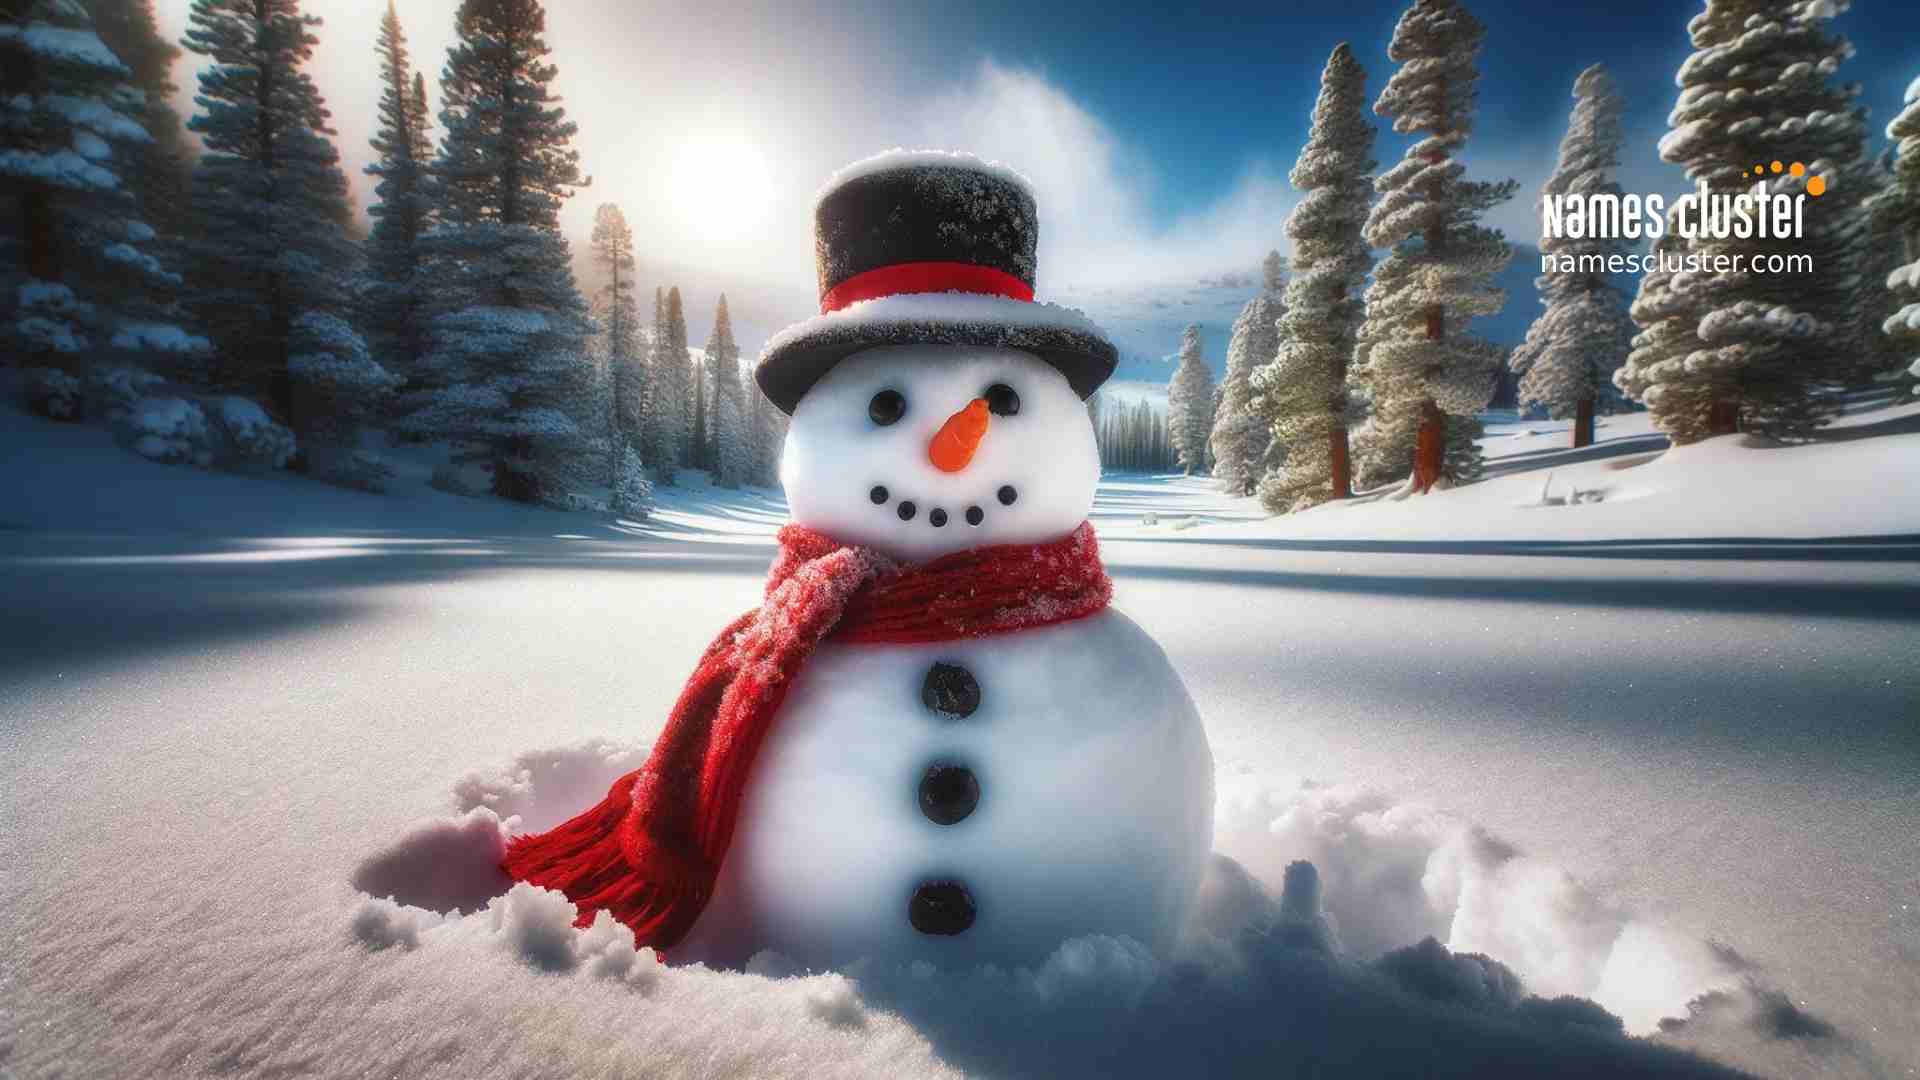 500+ Snowman Names (Cute, Funny, Clever, Famous & More!) - Name Of The Year